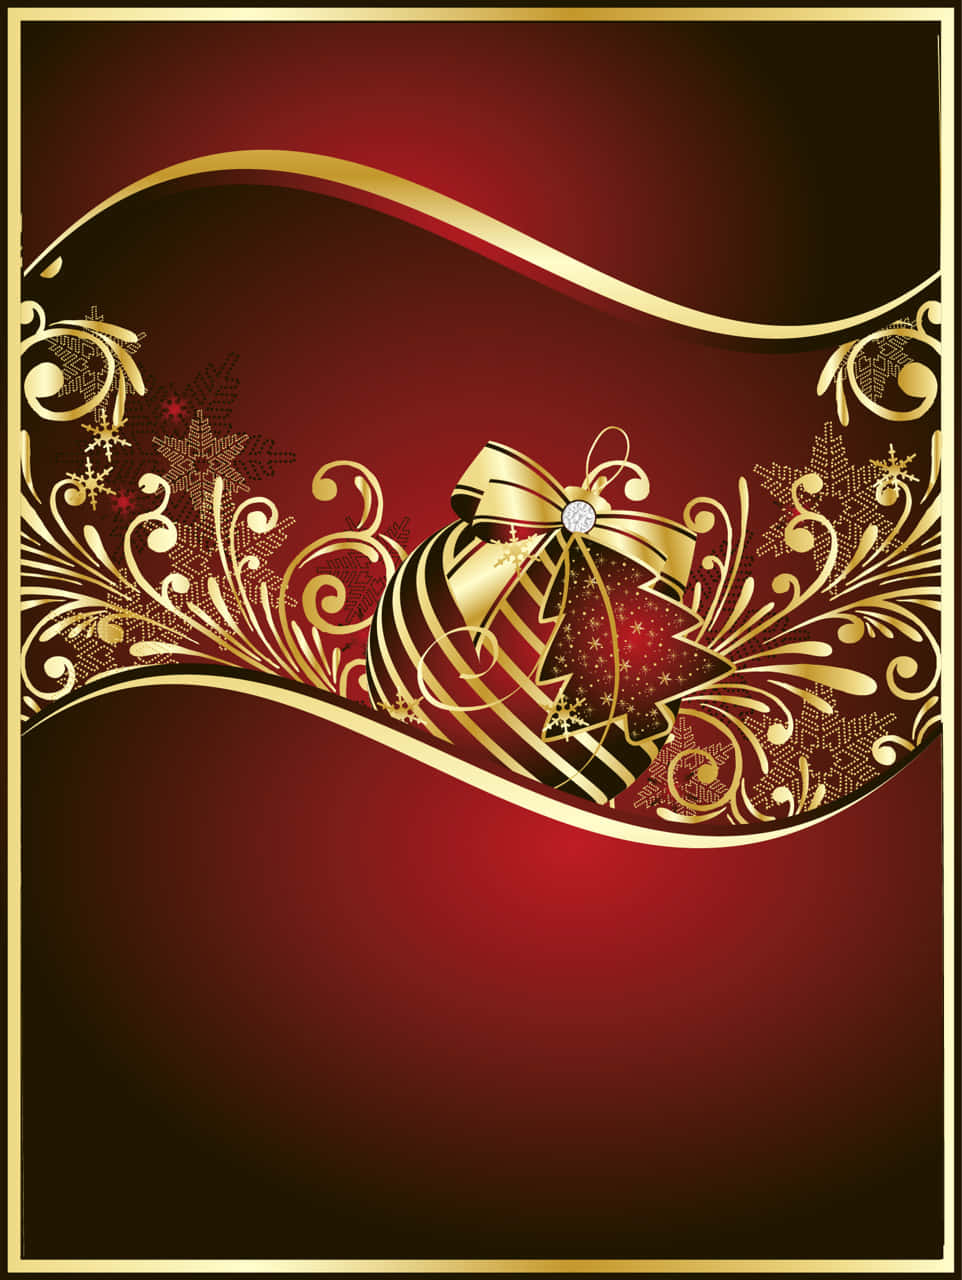 A warm, glowing red and gold background brings a sense of royal luxury to your home or office.